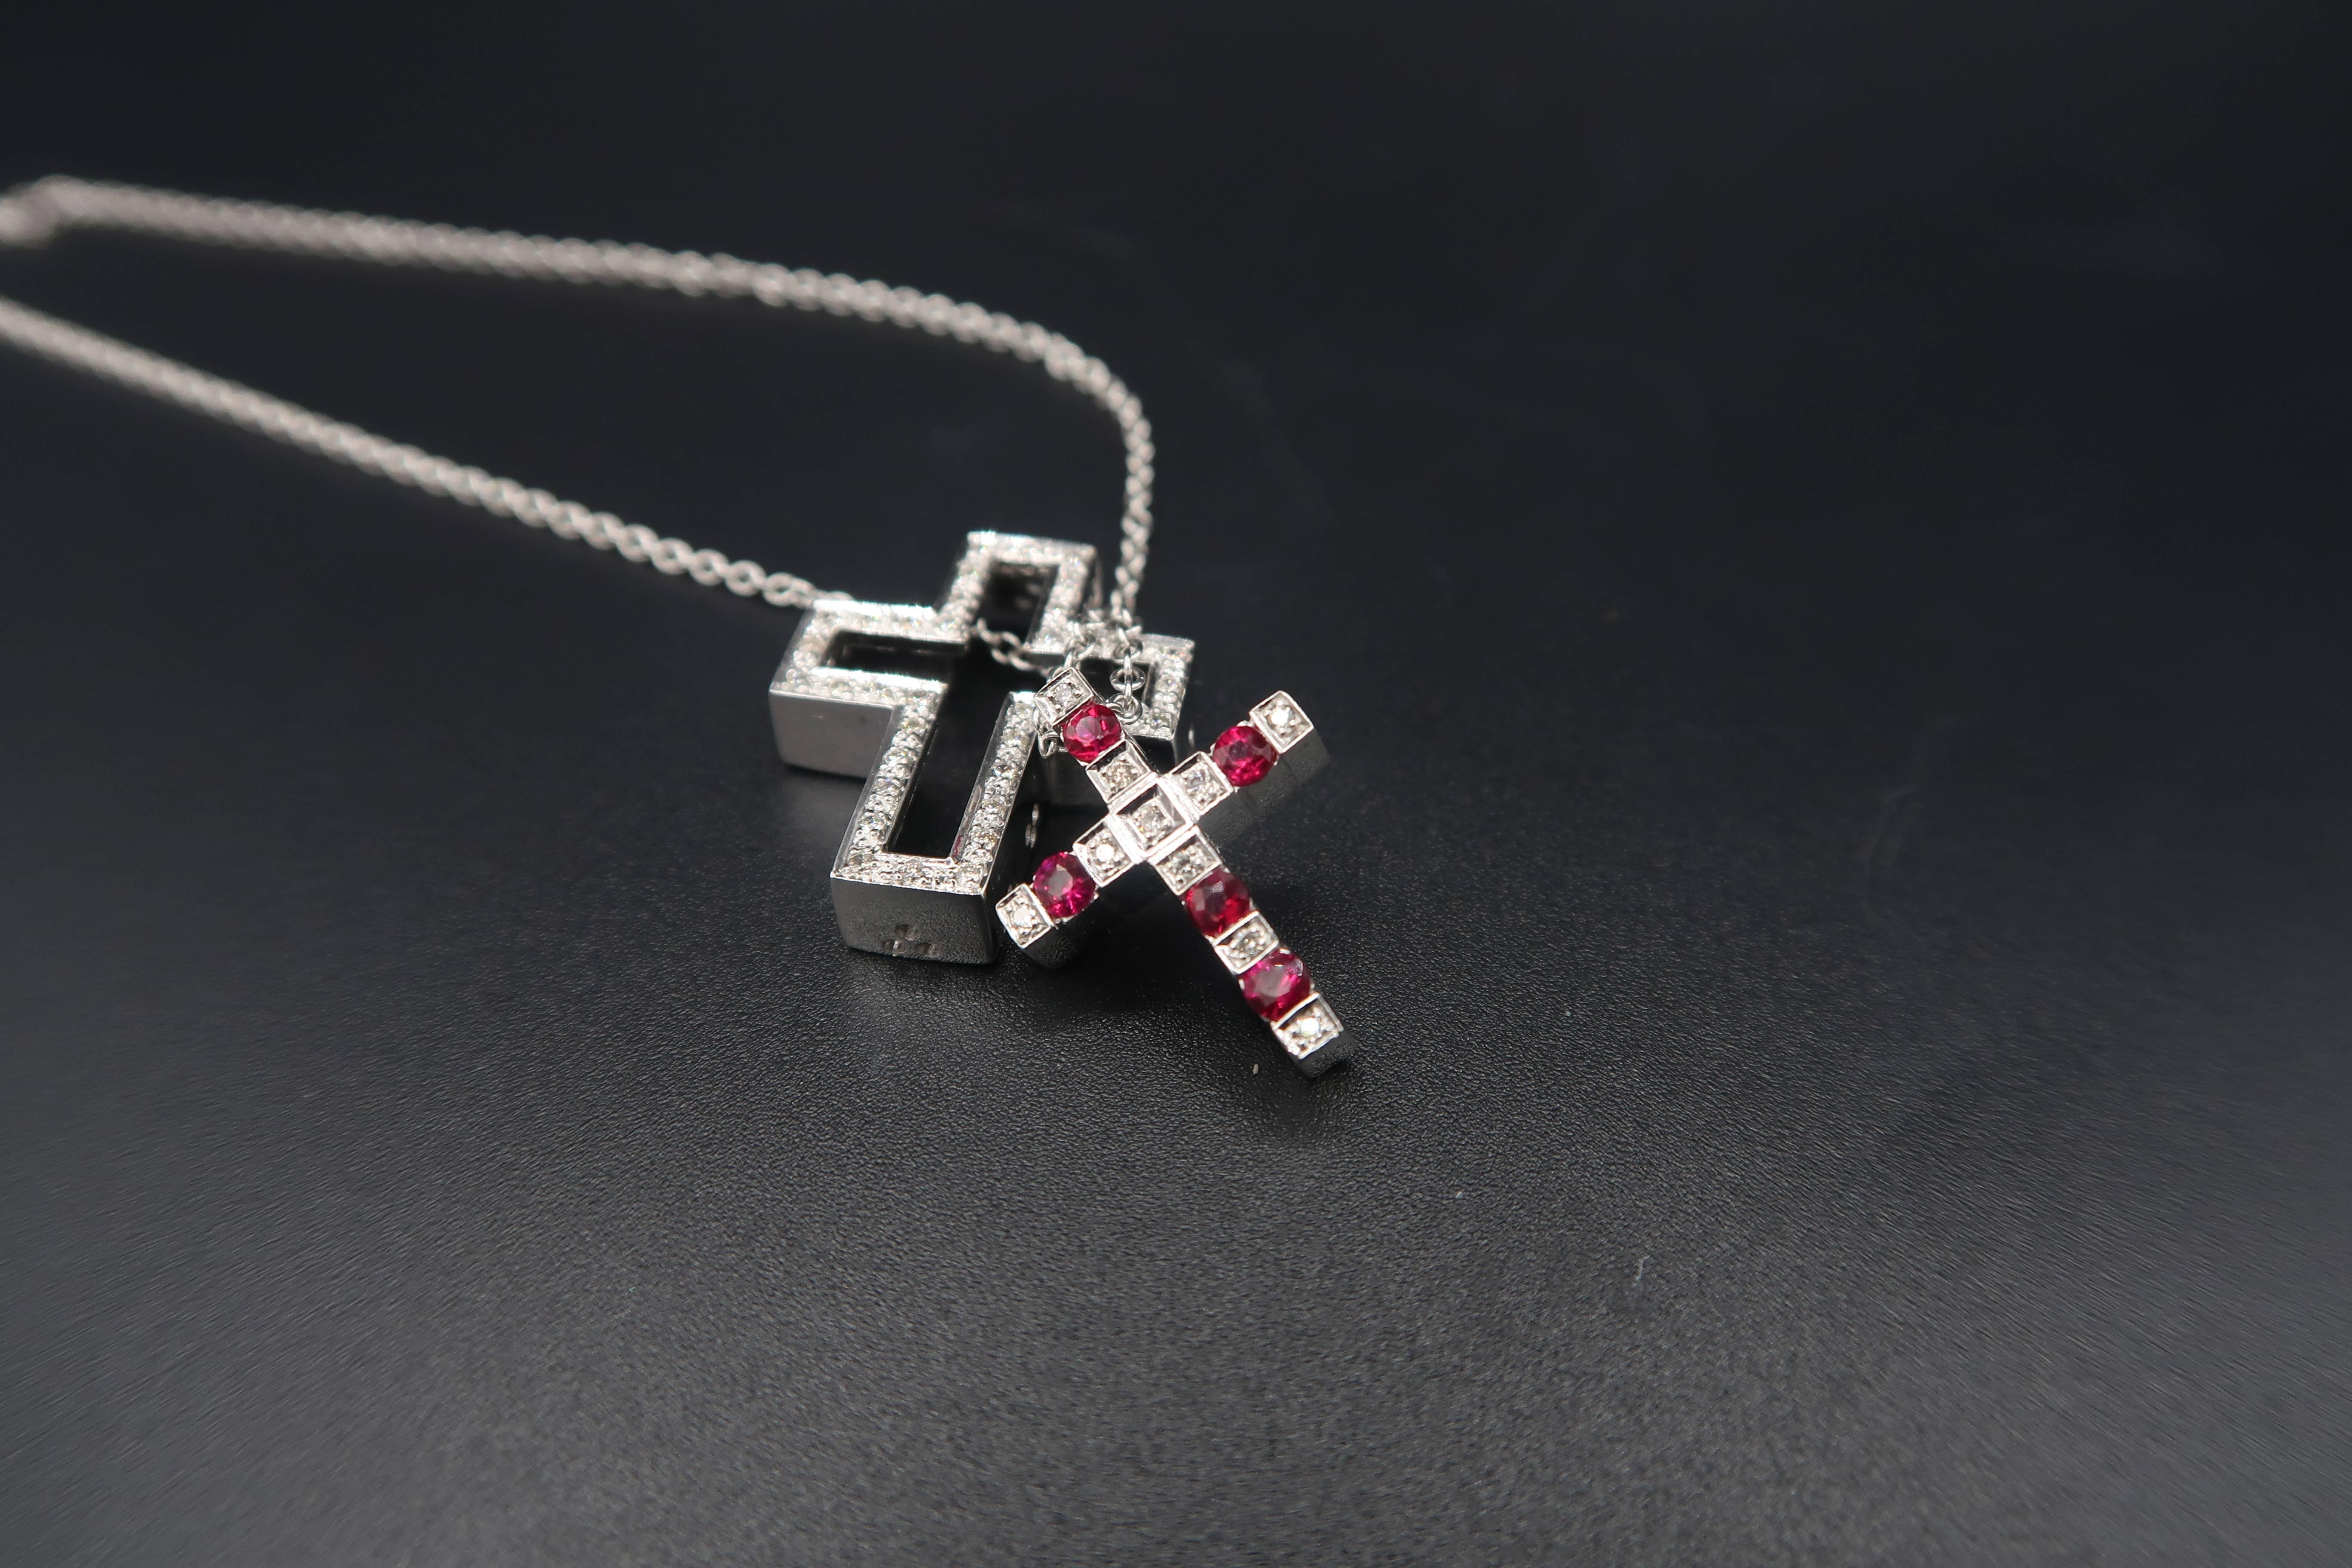 Modern cross pendants that can be combined into one breathtaking cross pendant. Can be worn 3 different ways. Come with a plain 18K white gold chain.

2 Splittable Stackable Nested Cross Pendants
Gold: 18K White Gold, 8.668 g
Ruby: 0.50 ct
Diamond: